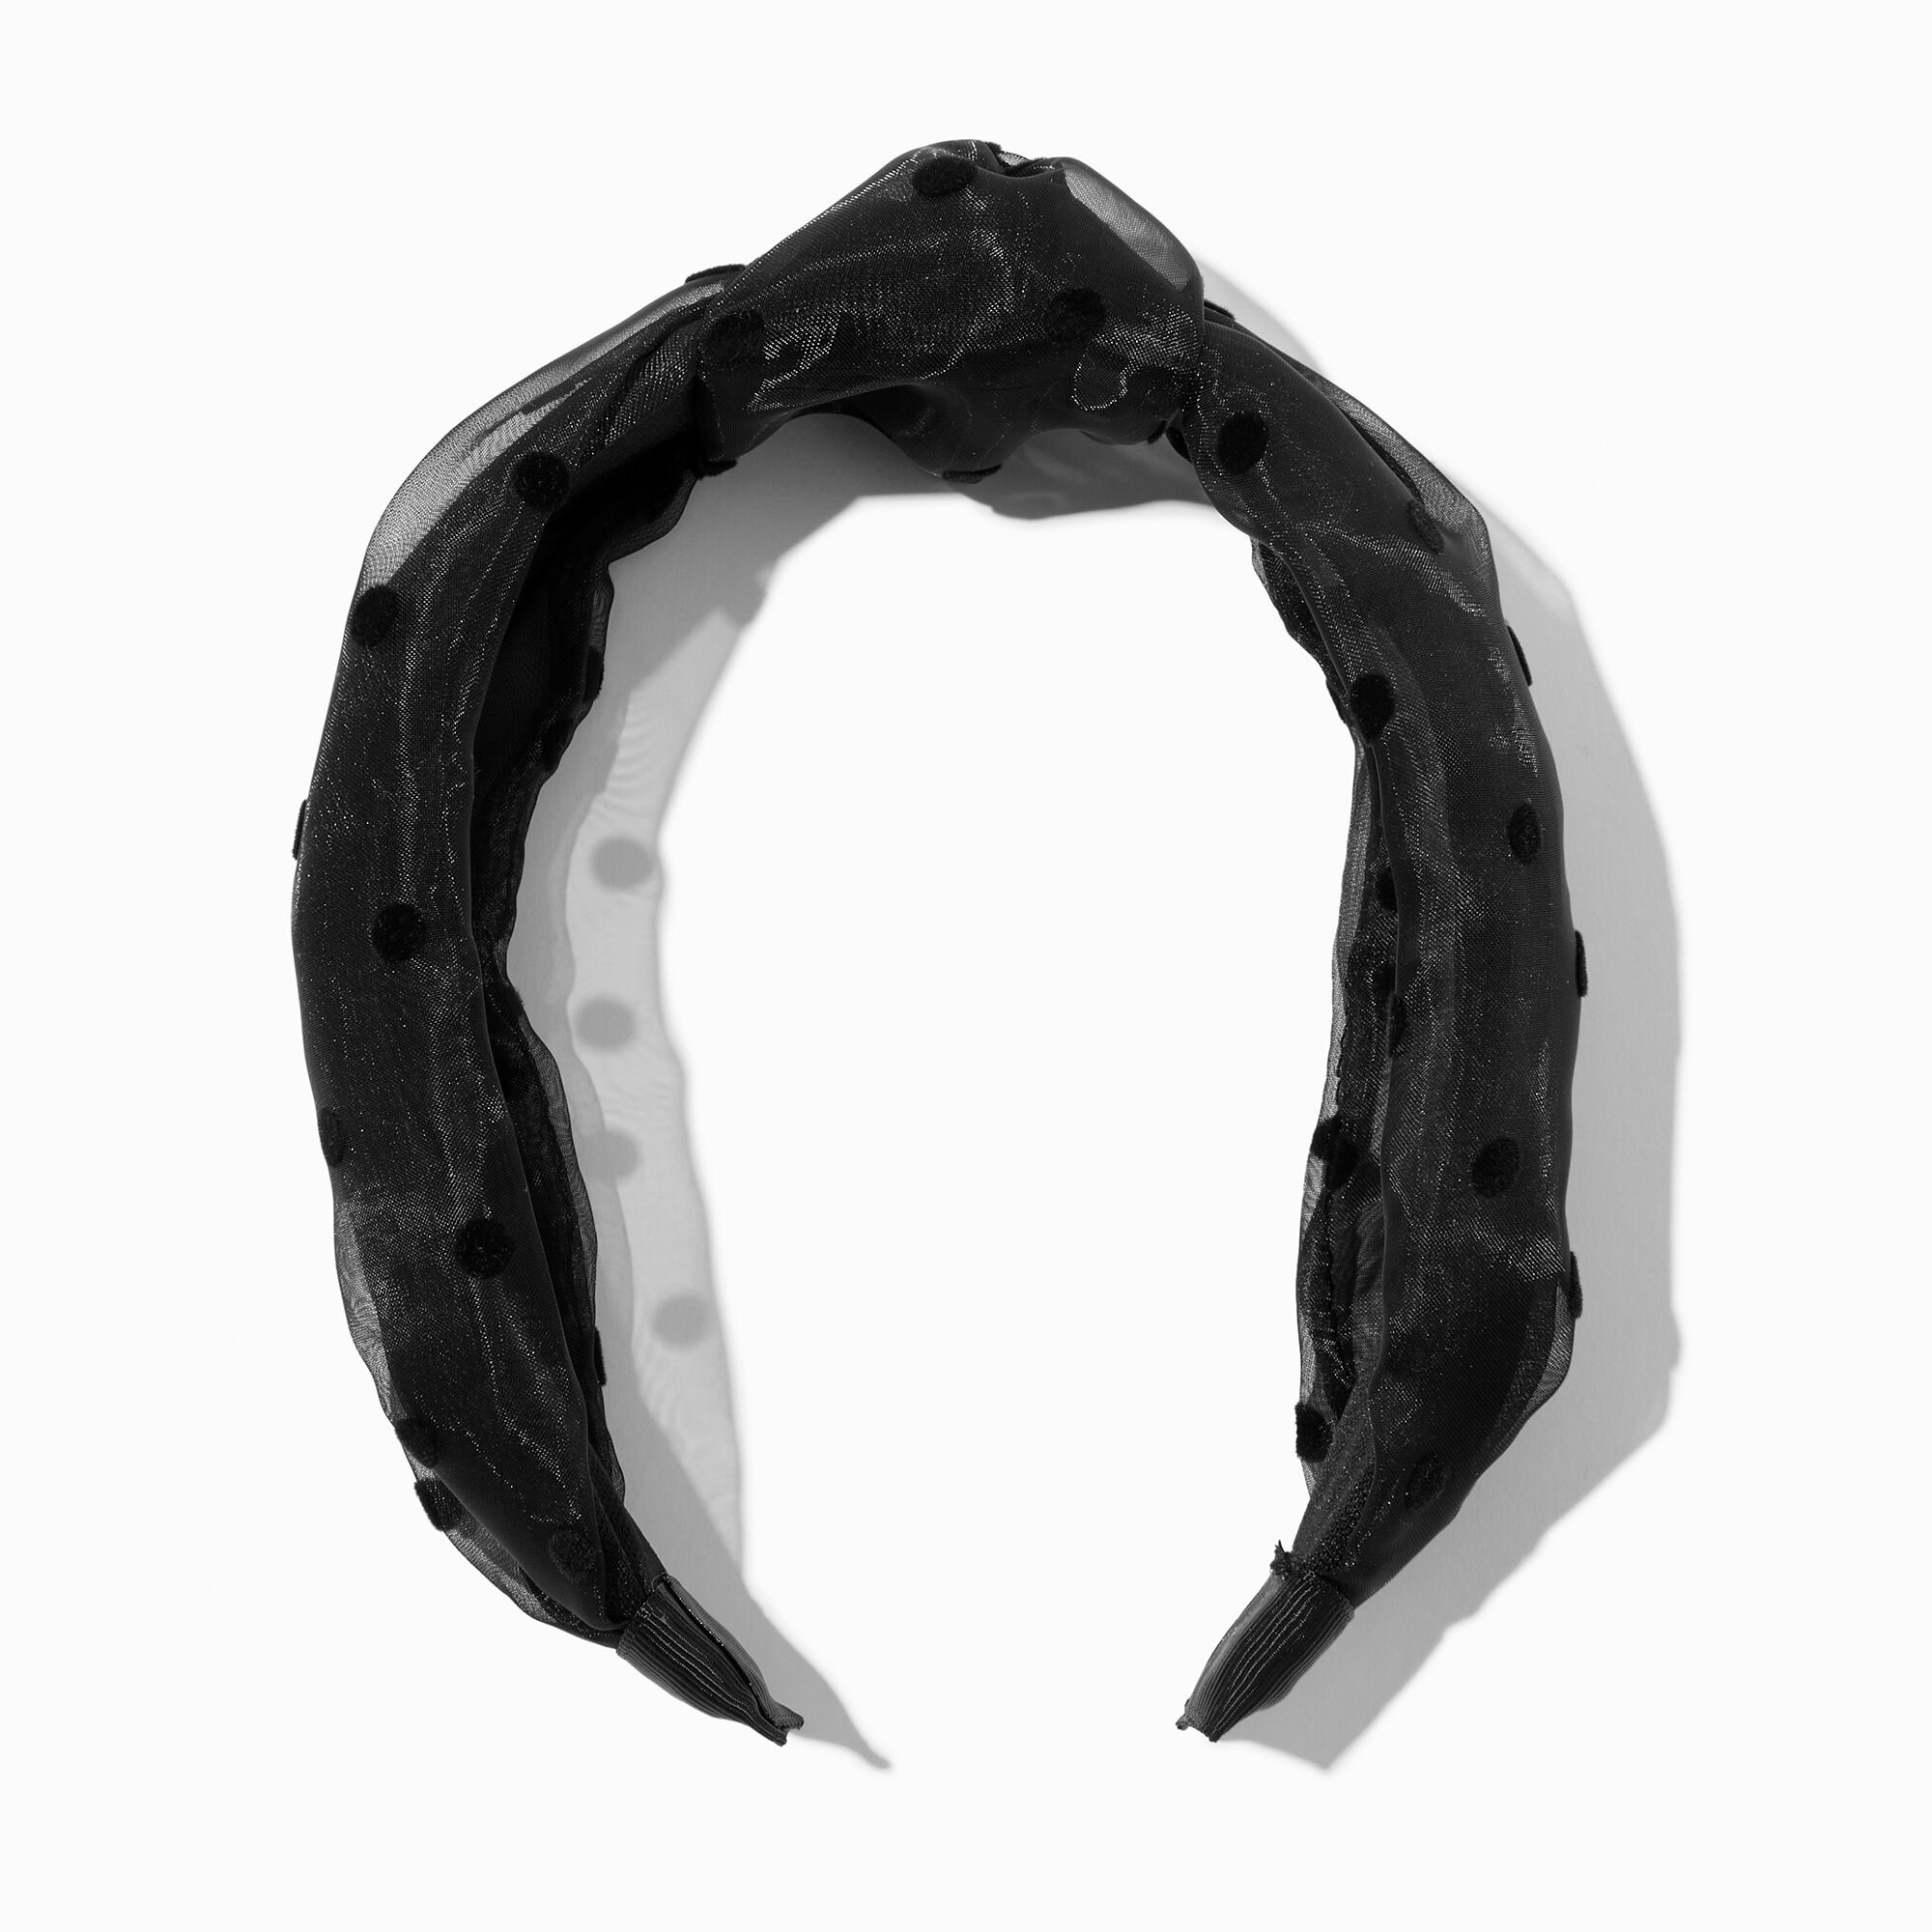 View Claires Polka Dot Knotted Headband Black information